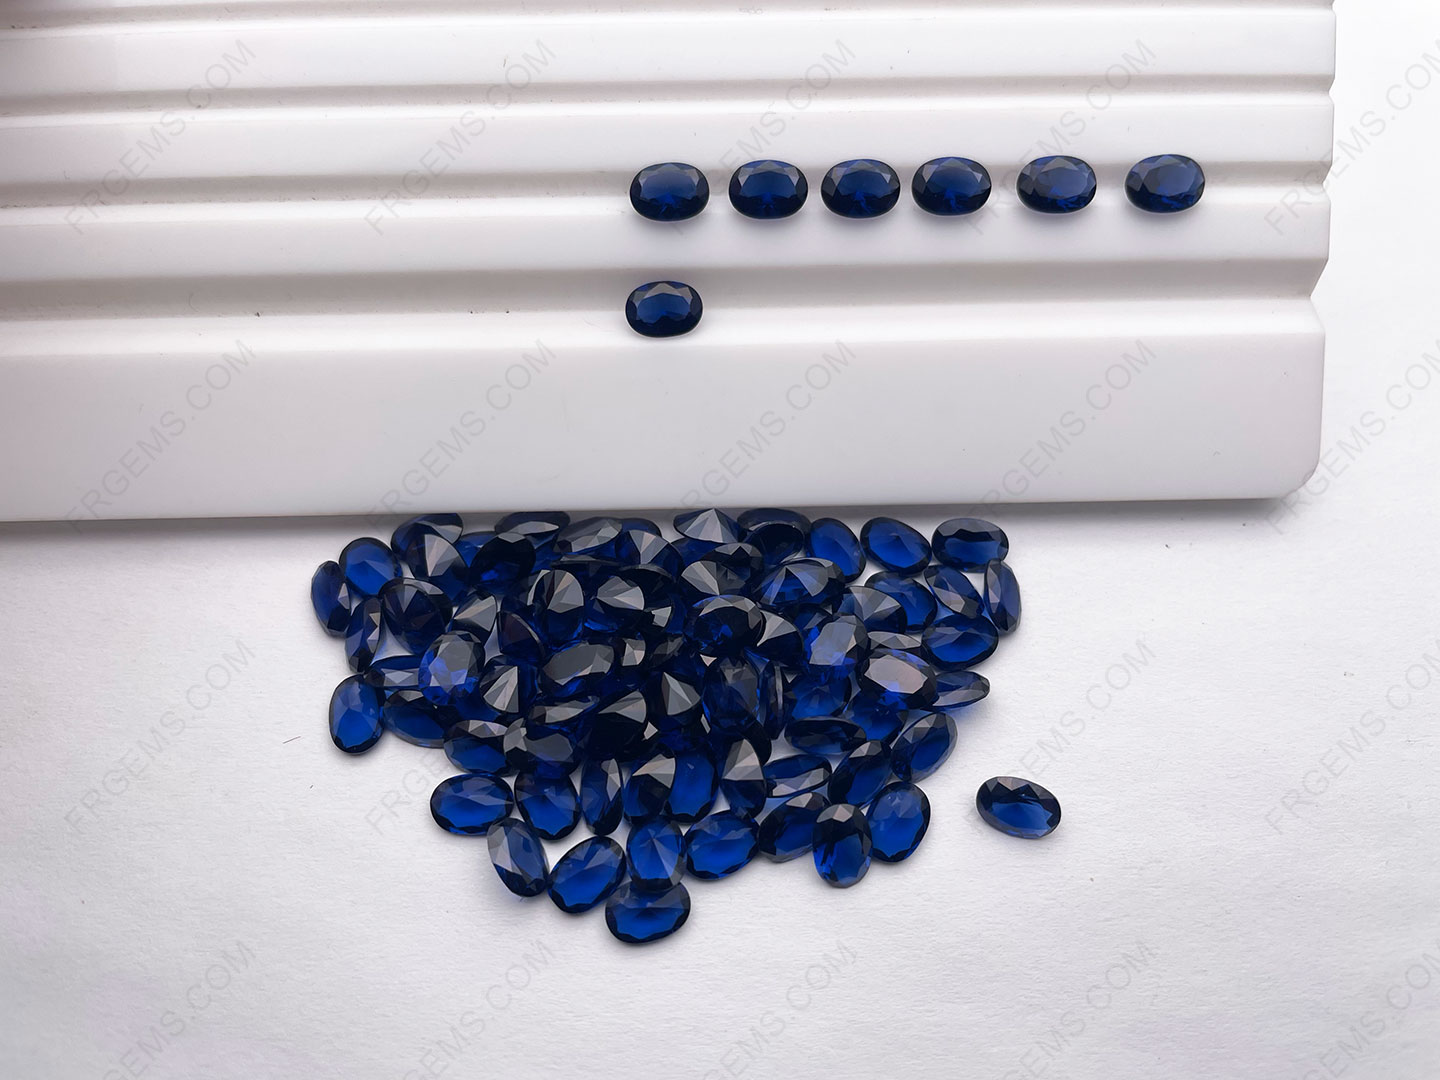 Nano Crystal Sapphire Blue Dark 121/1# color Oval faceted cut 5x7mm and 4x6mm gemstones bulk wholesale